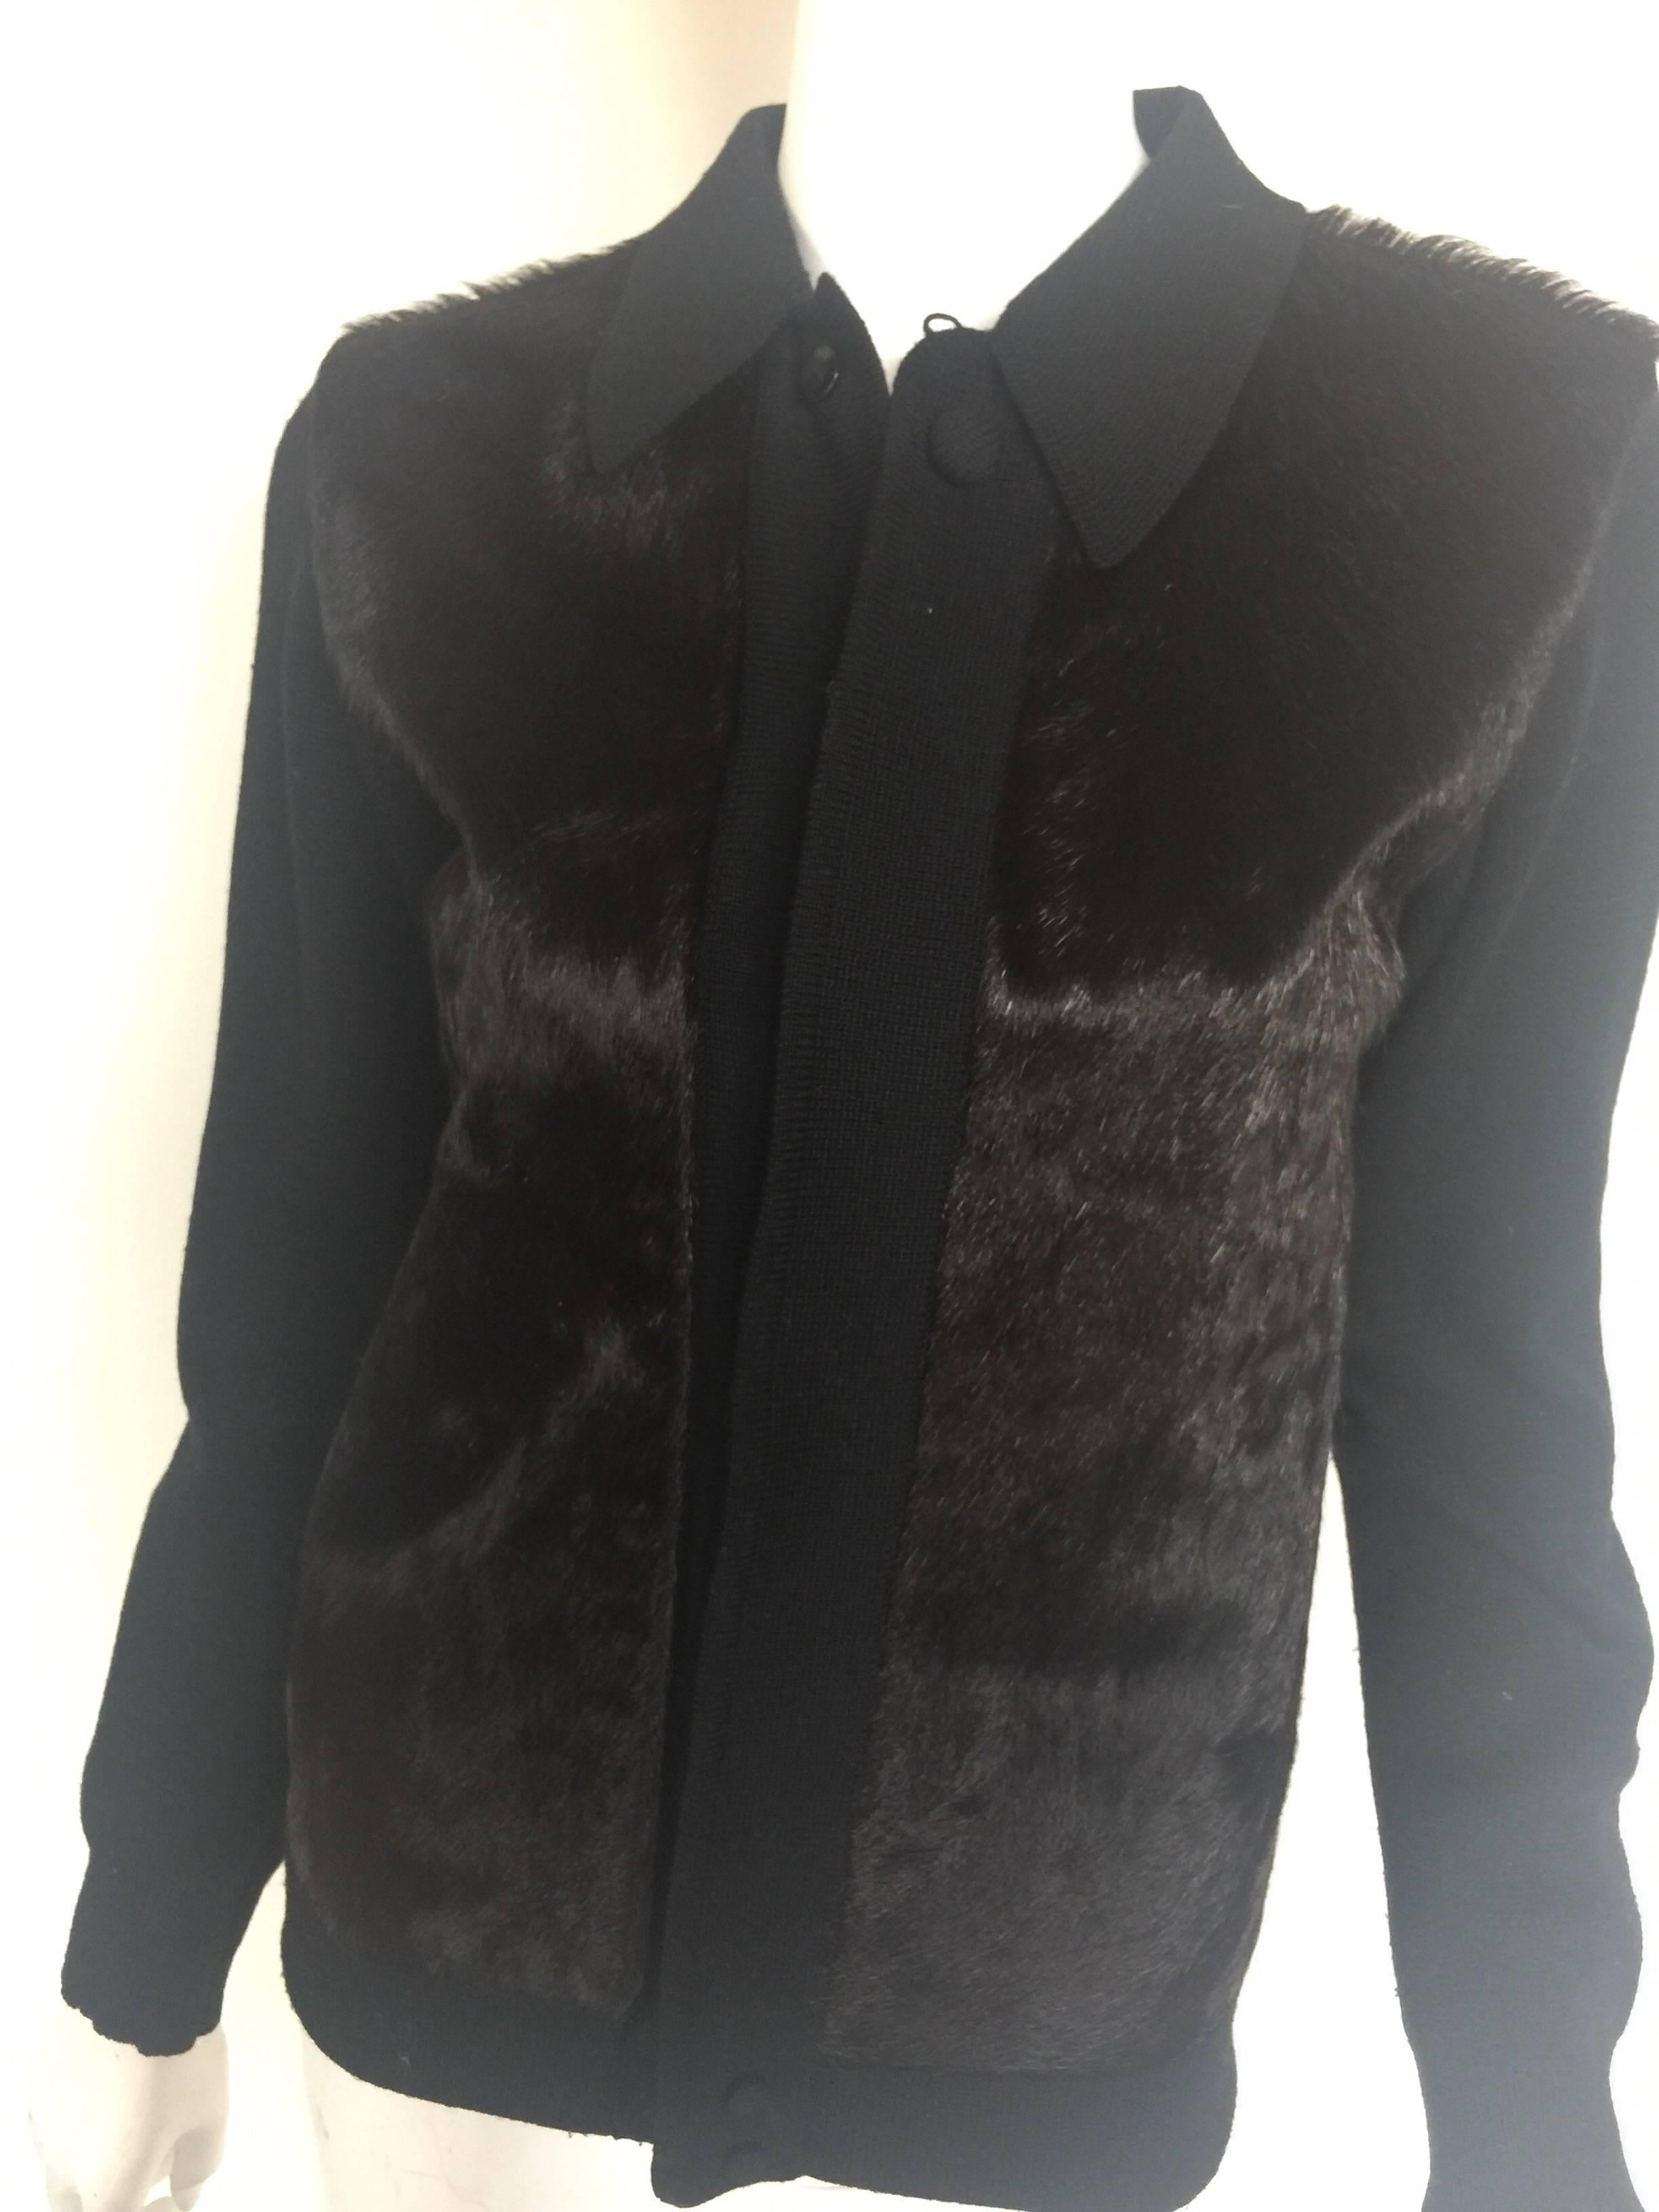 This black knot cardigan has dark brown/black cowhide panel in the front.  It fits a small but please check measurements.